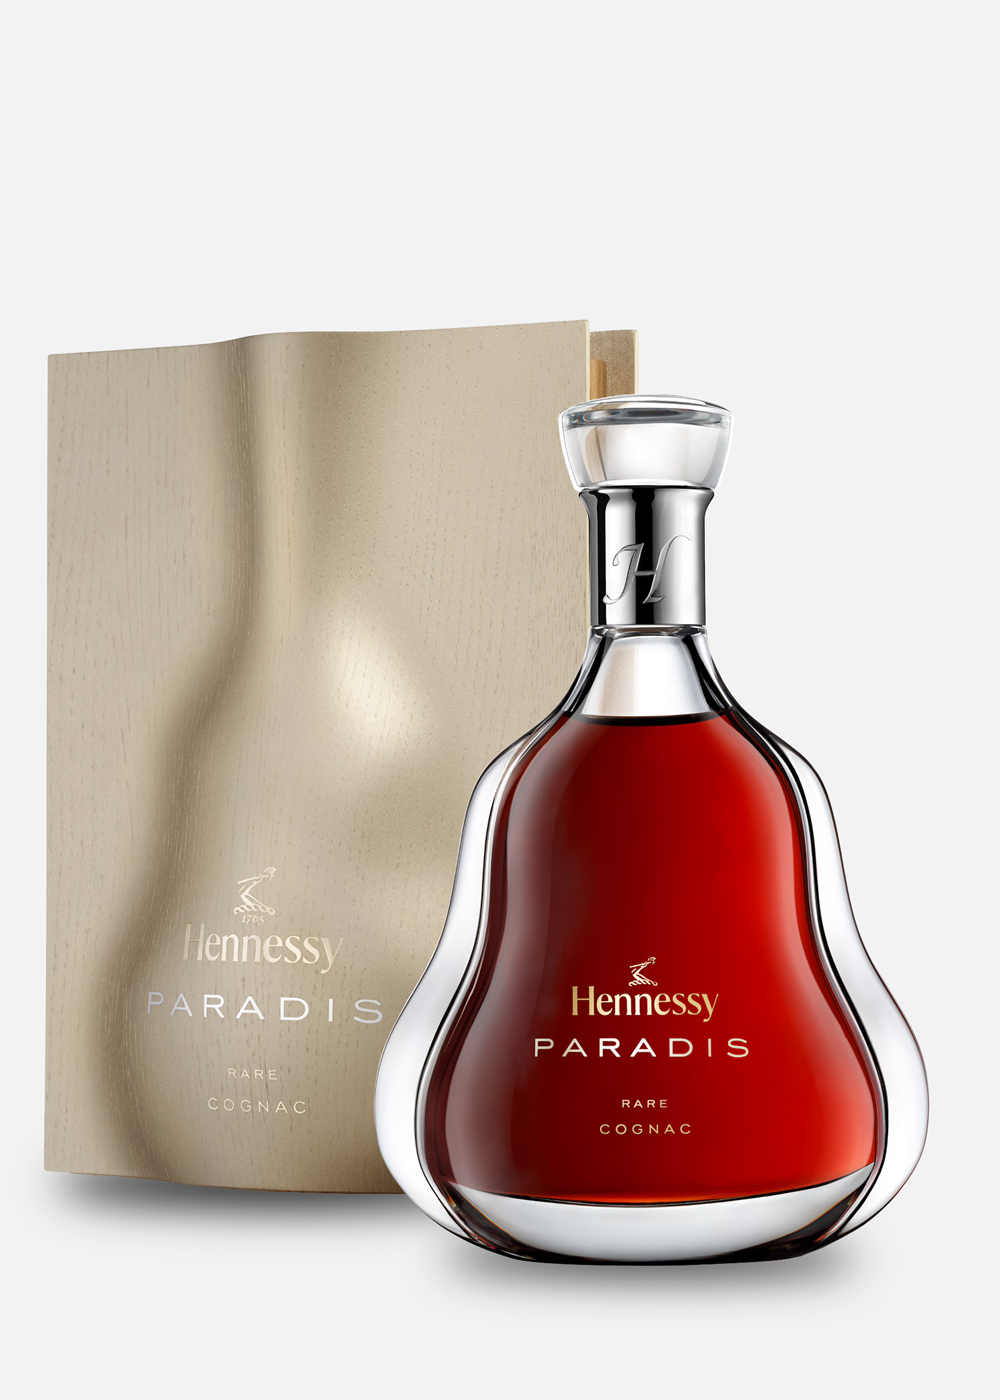 hennessyparadismetbox.png